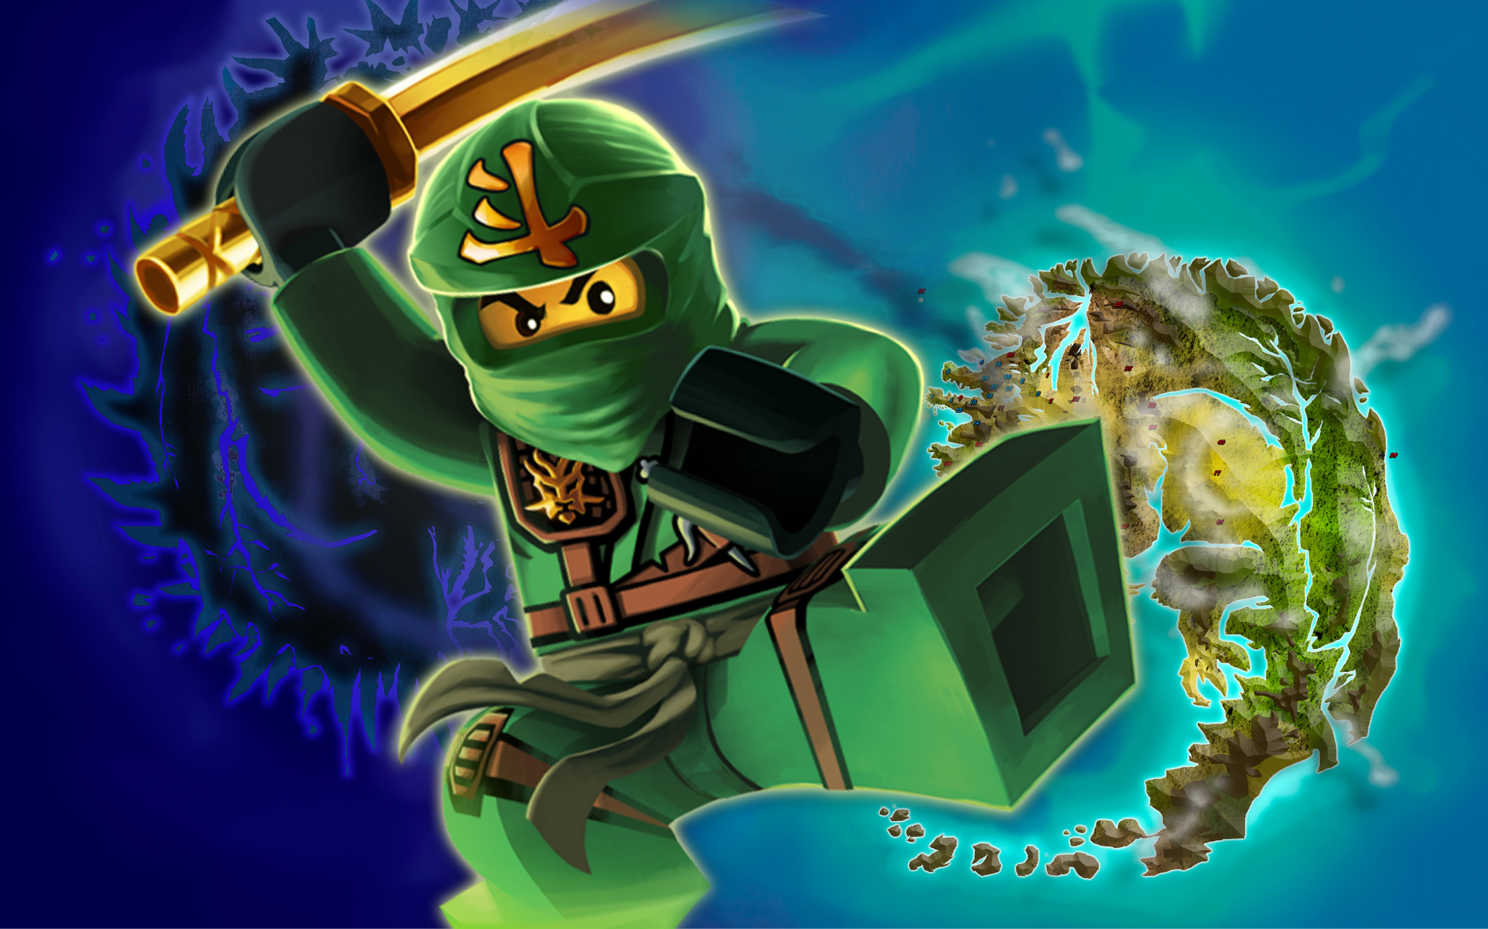 You Can Lego Ninjago In Your Puter By Clicking Resolution